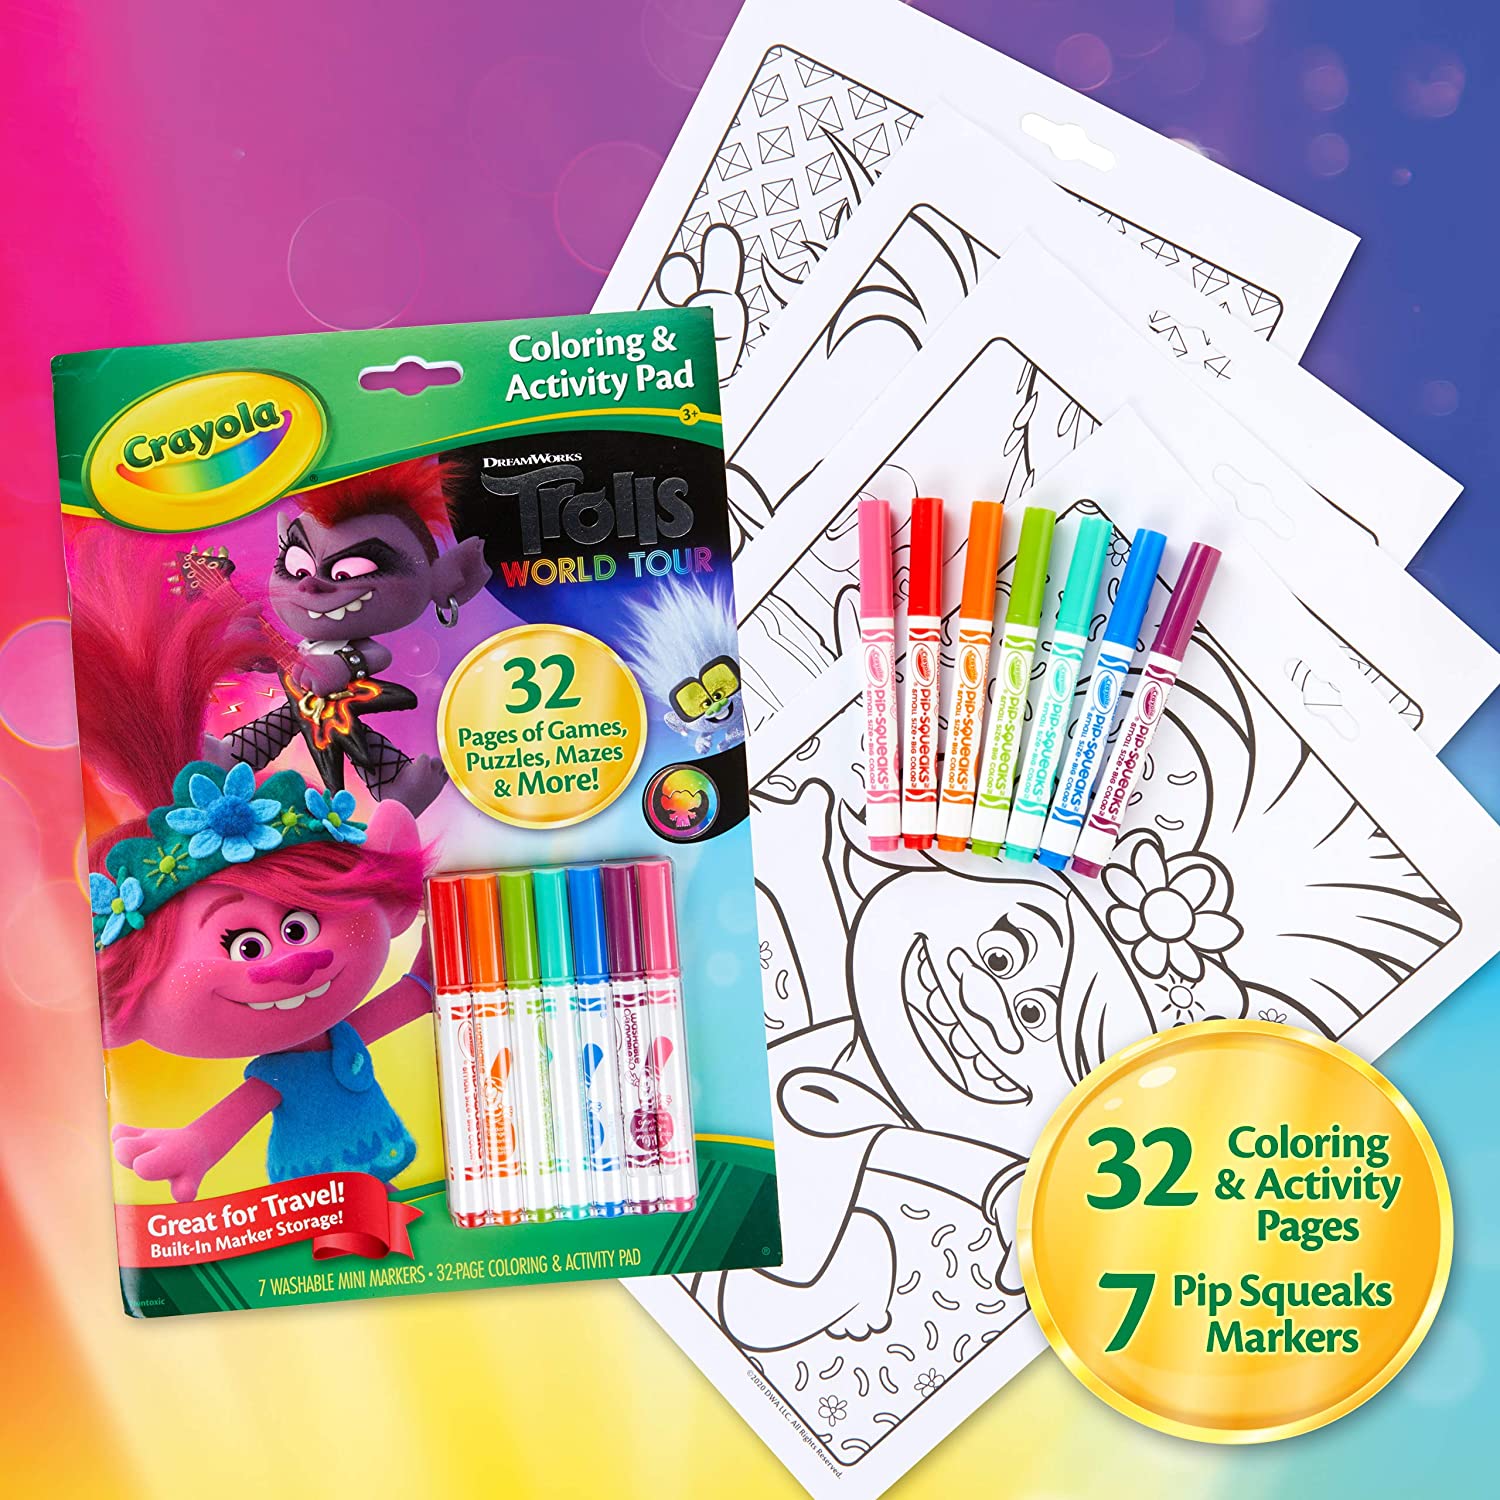  Crayola All That Glitters Art Case Coloring Set, Toys, Gift for Kids  Age 5+ : Toys & Games